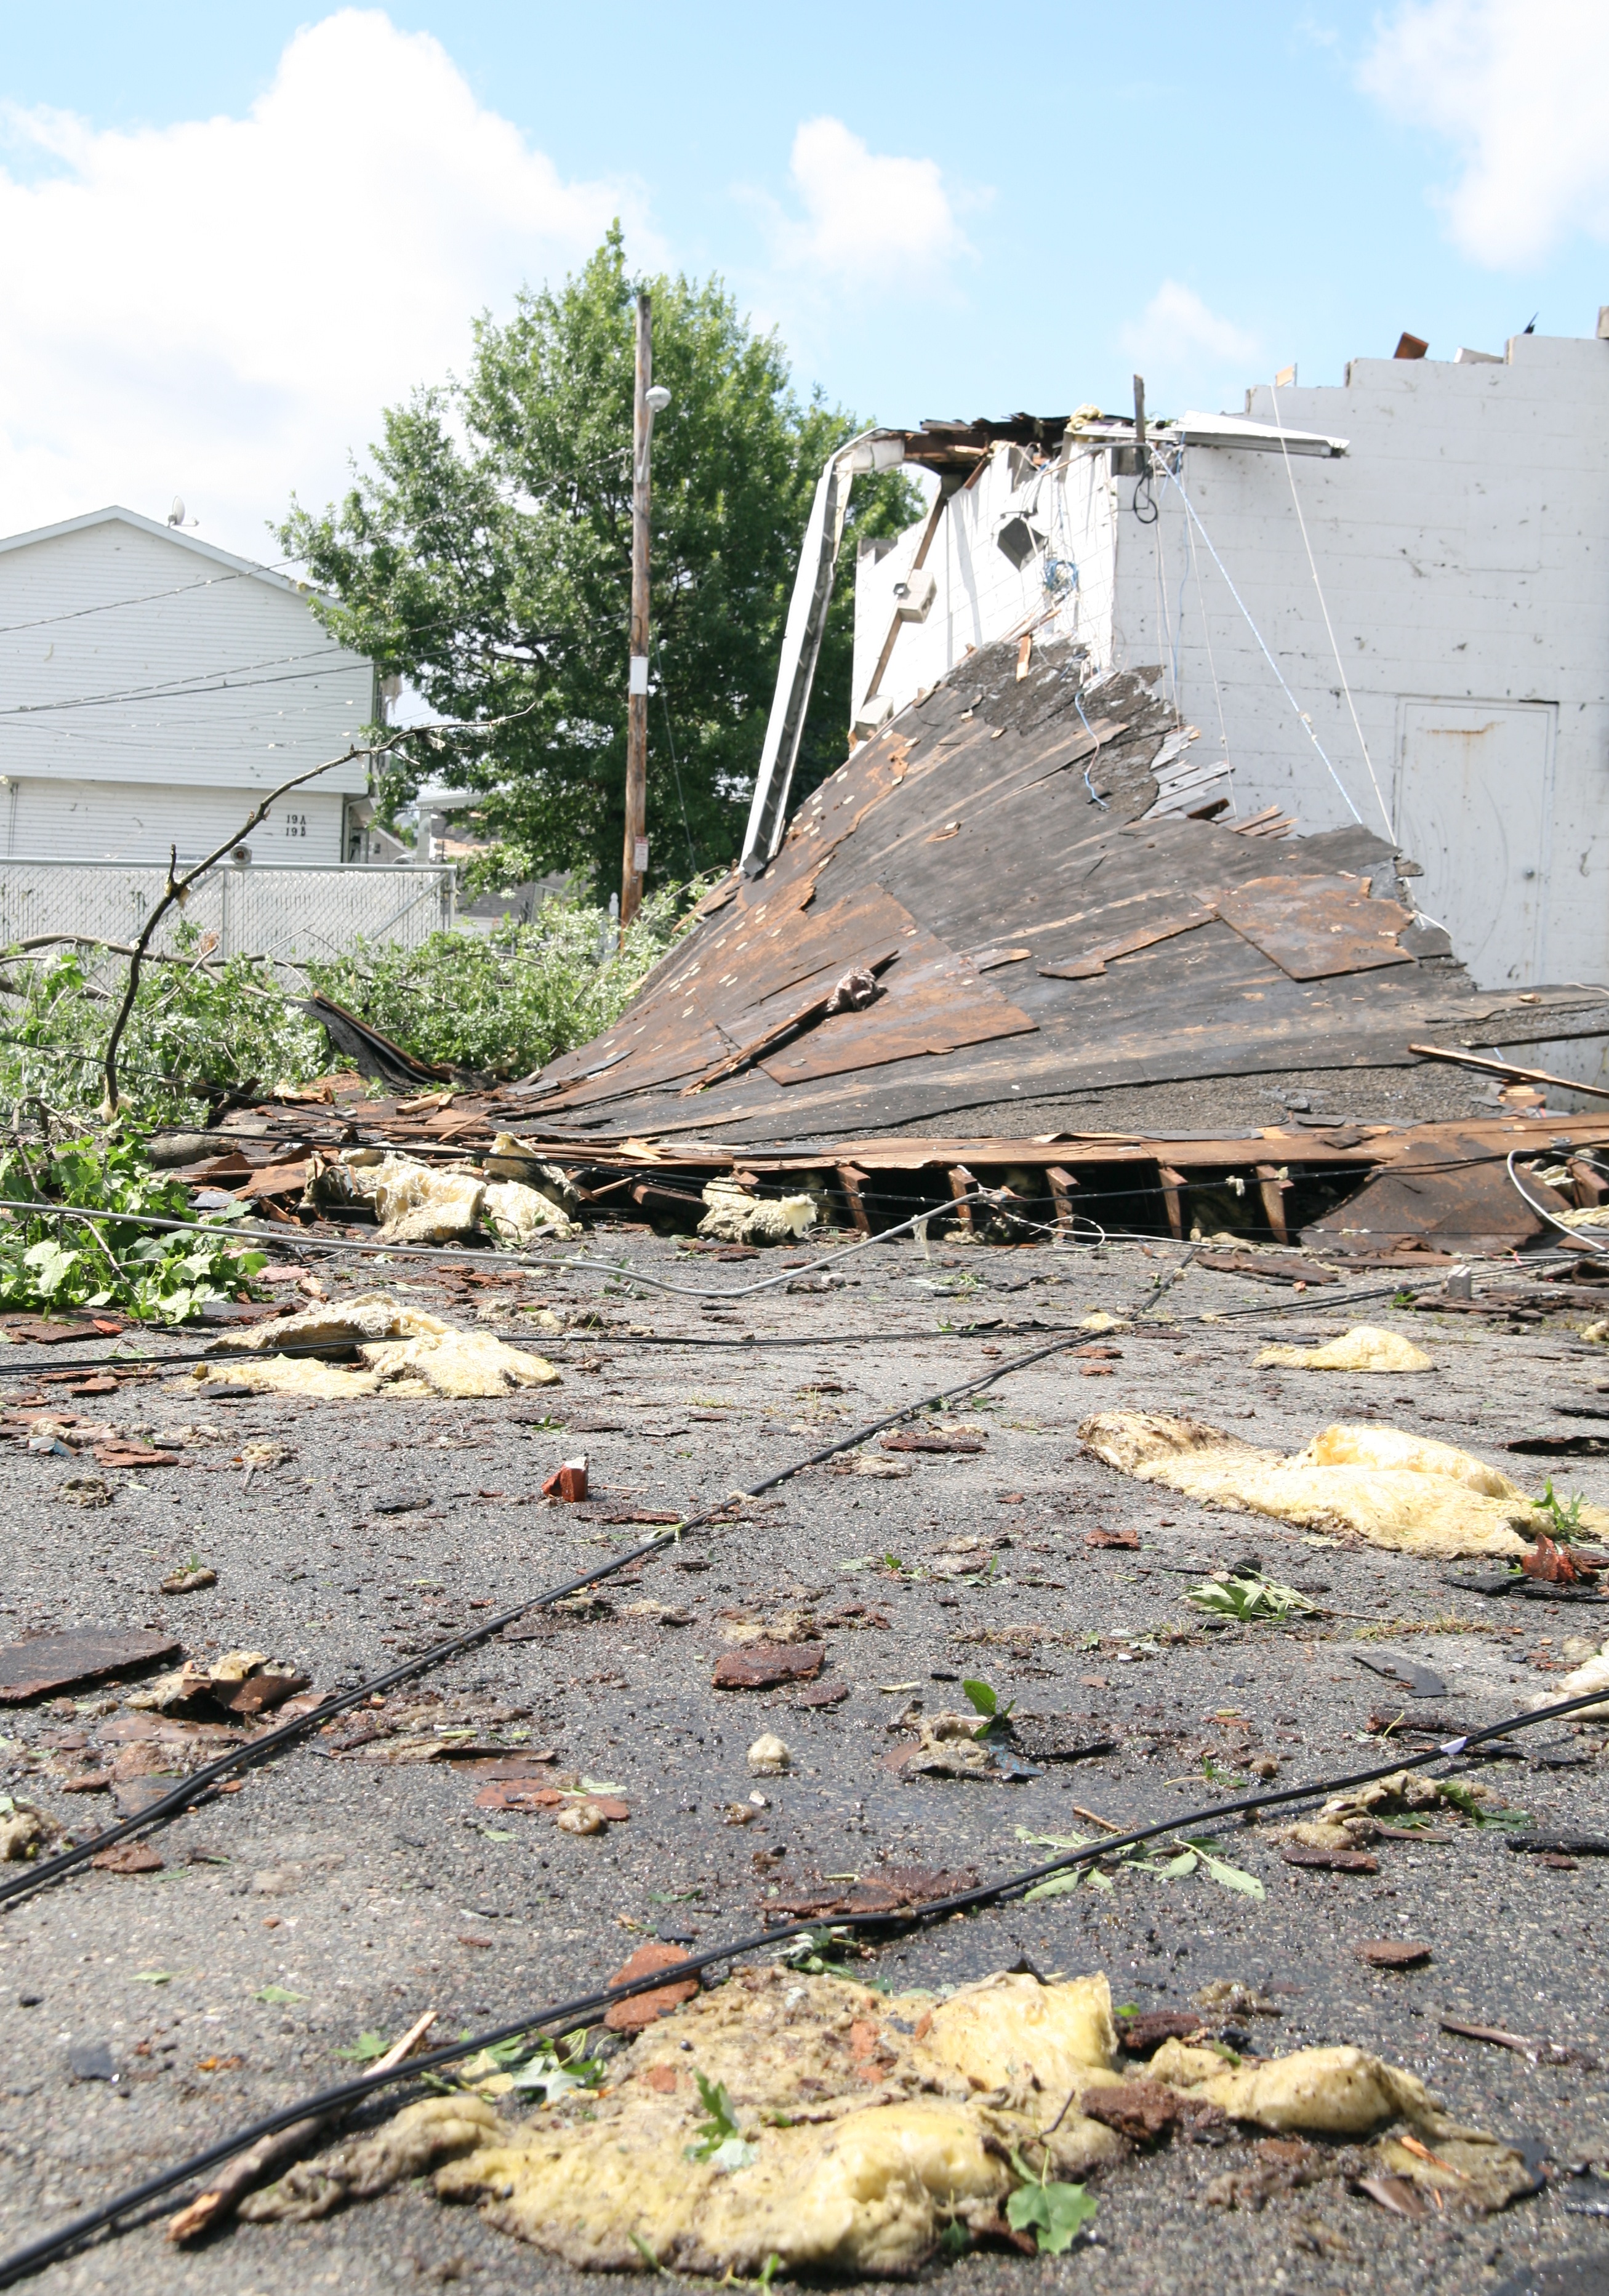 The roof was ripped off of the Curley building – which houses an auto body shop on lower Broadway. Electrical wires are all over the ground as well.